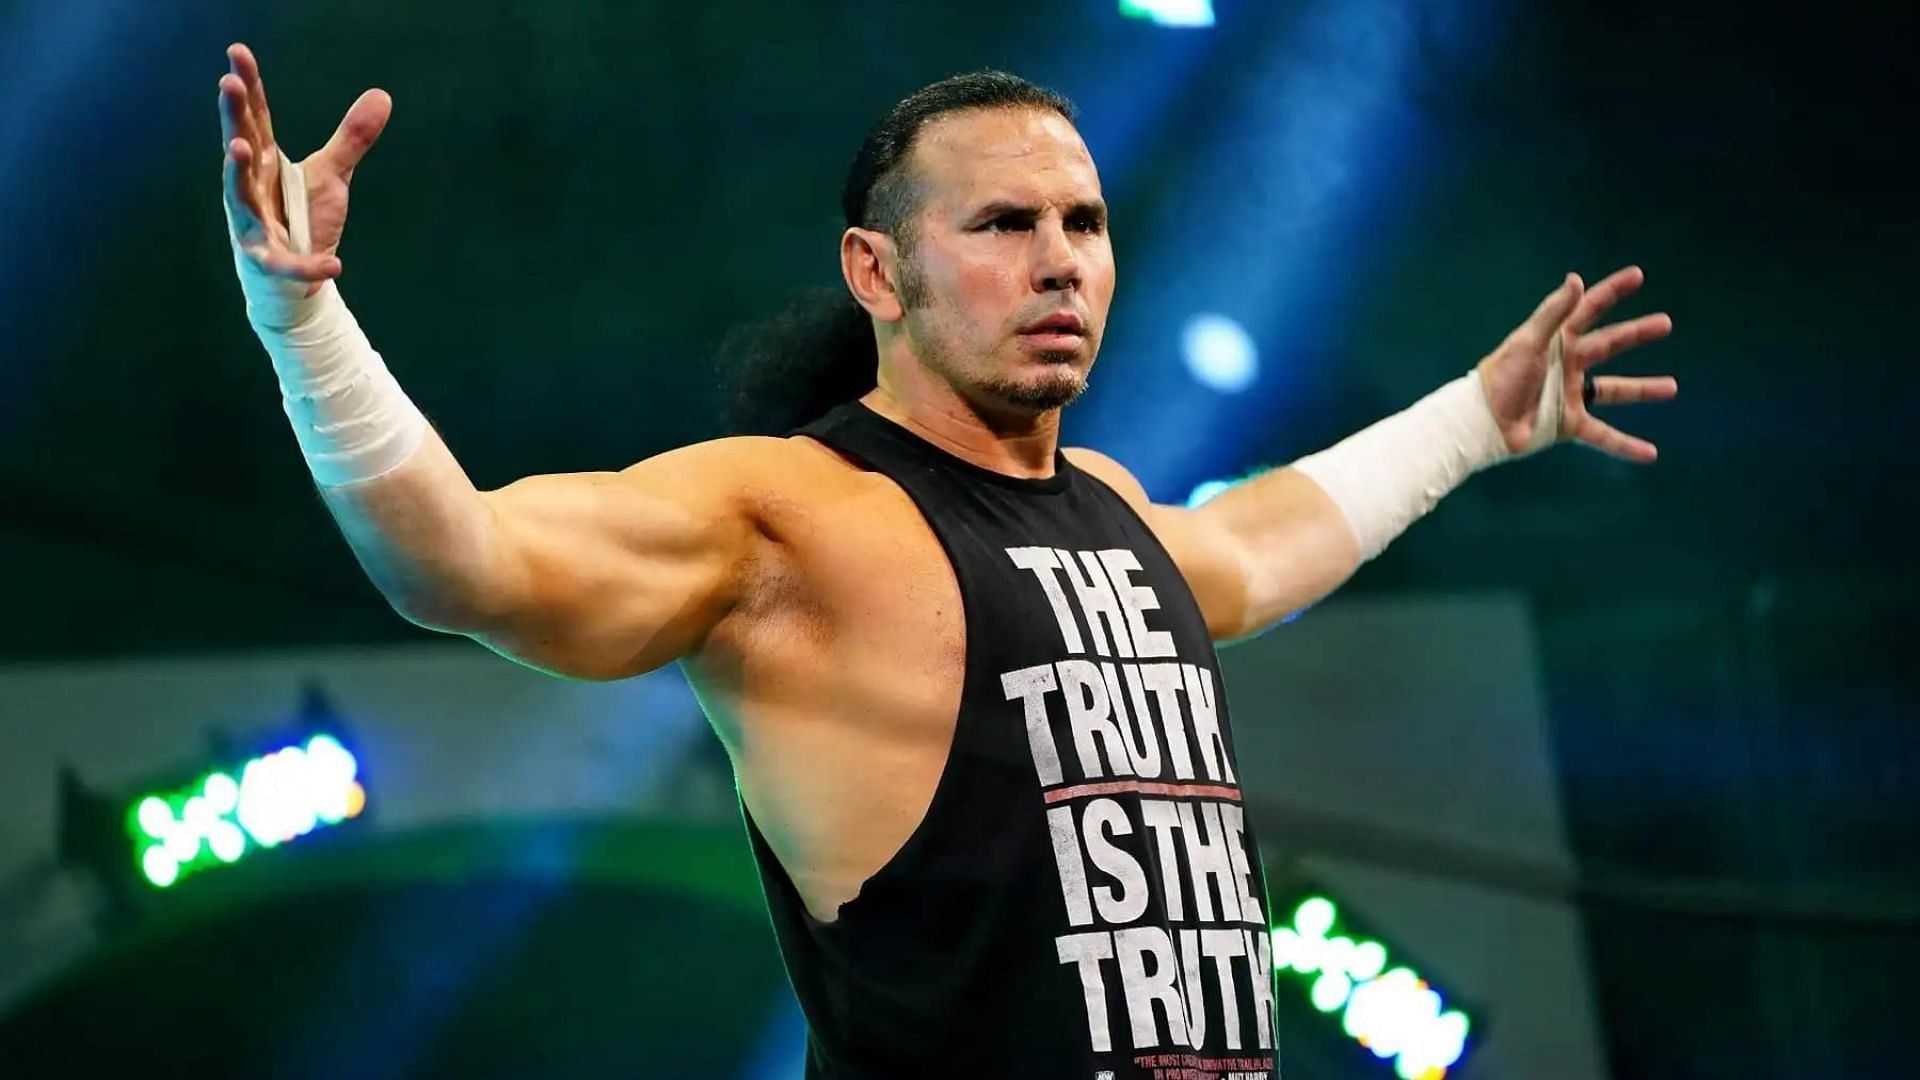 Matt Hardy is a former WWE veteran who is now with AEW